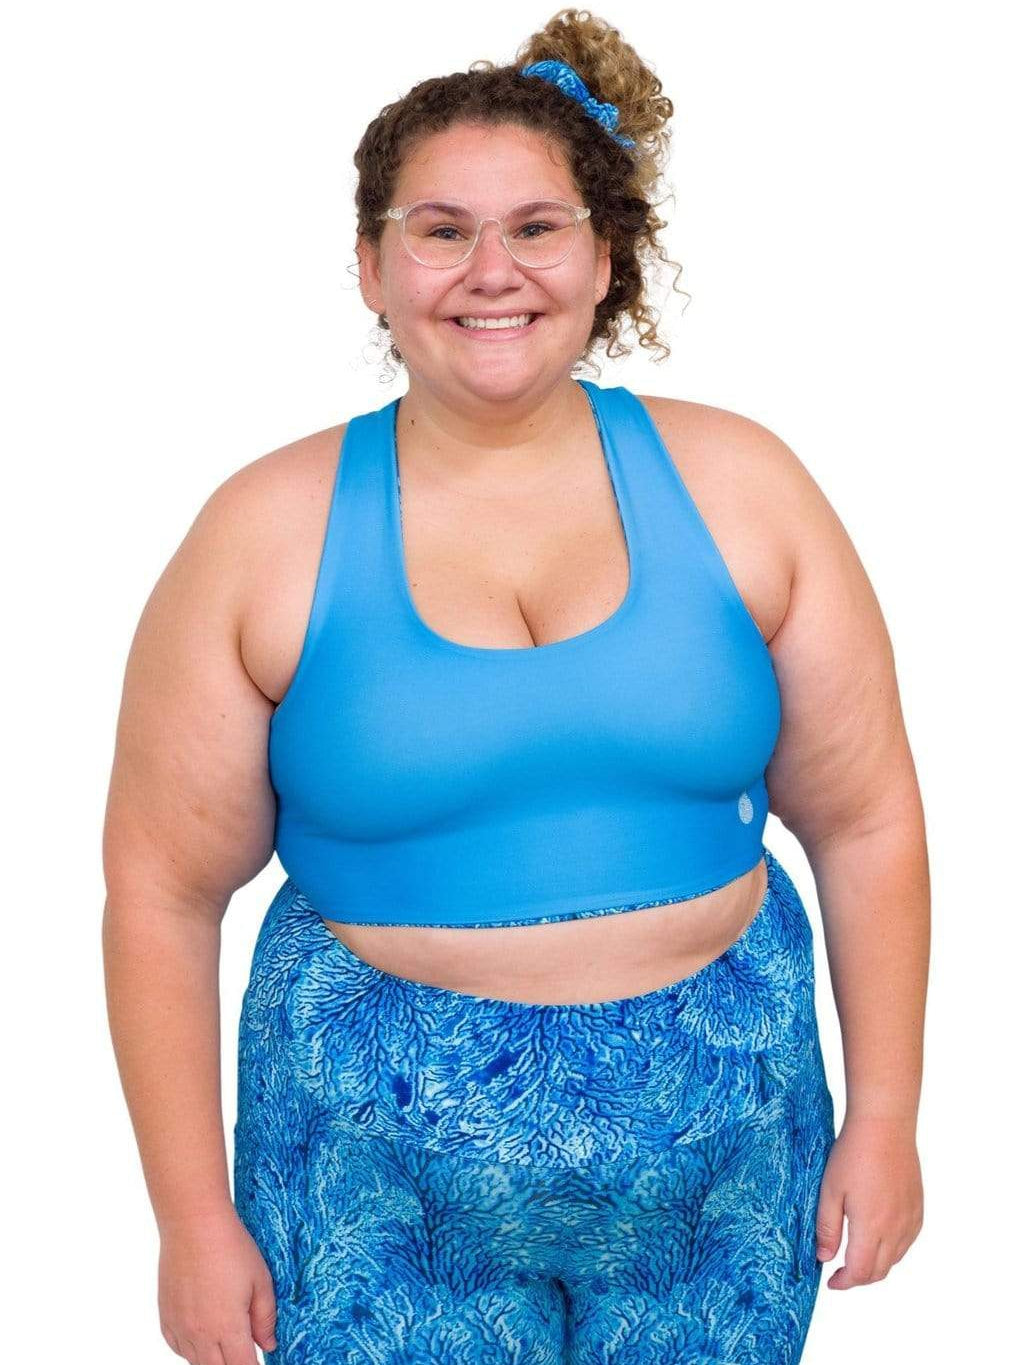 Model: Angela is working towards her Master of Professional Science in Marine Conservation. She is 5'6", 235 lbs, 42E and is wearing a 2XL top and legging.